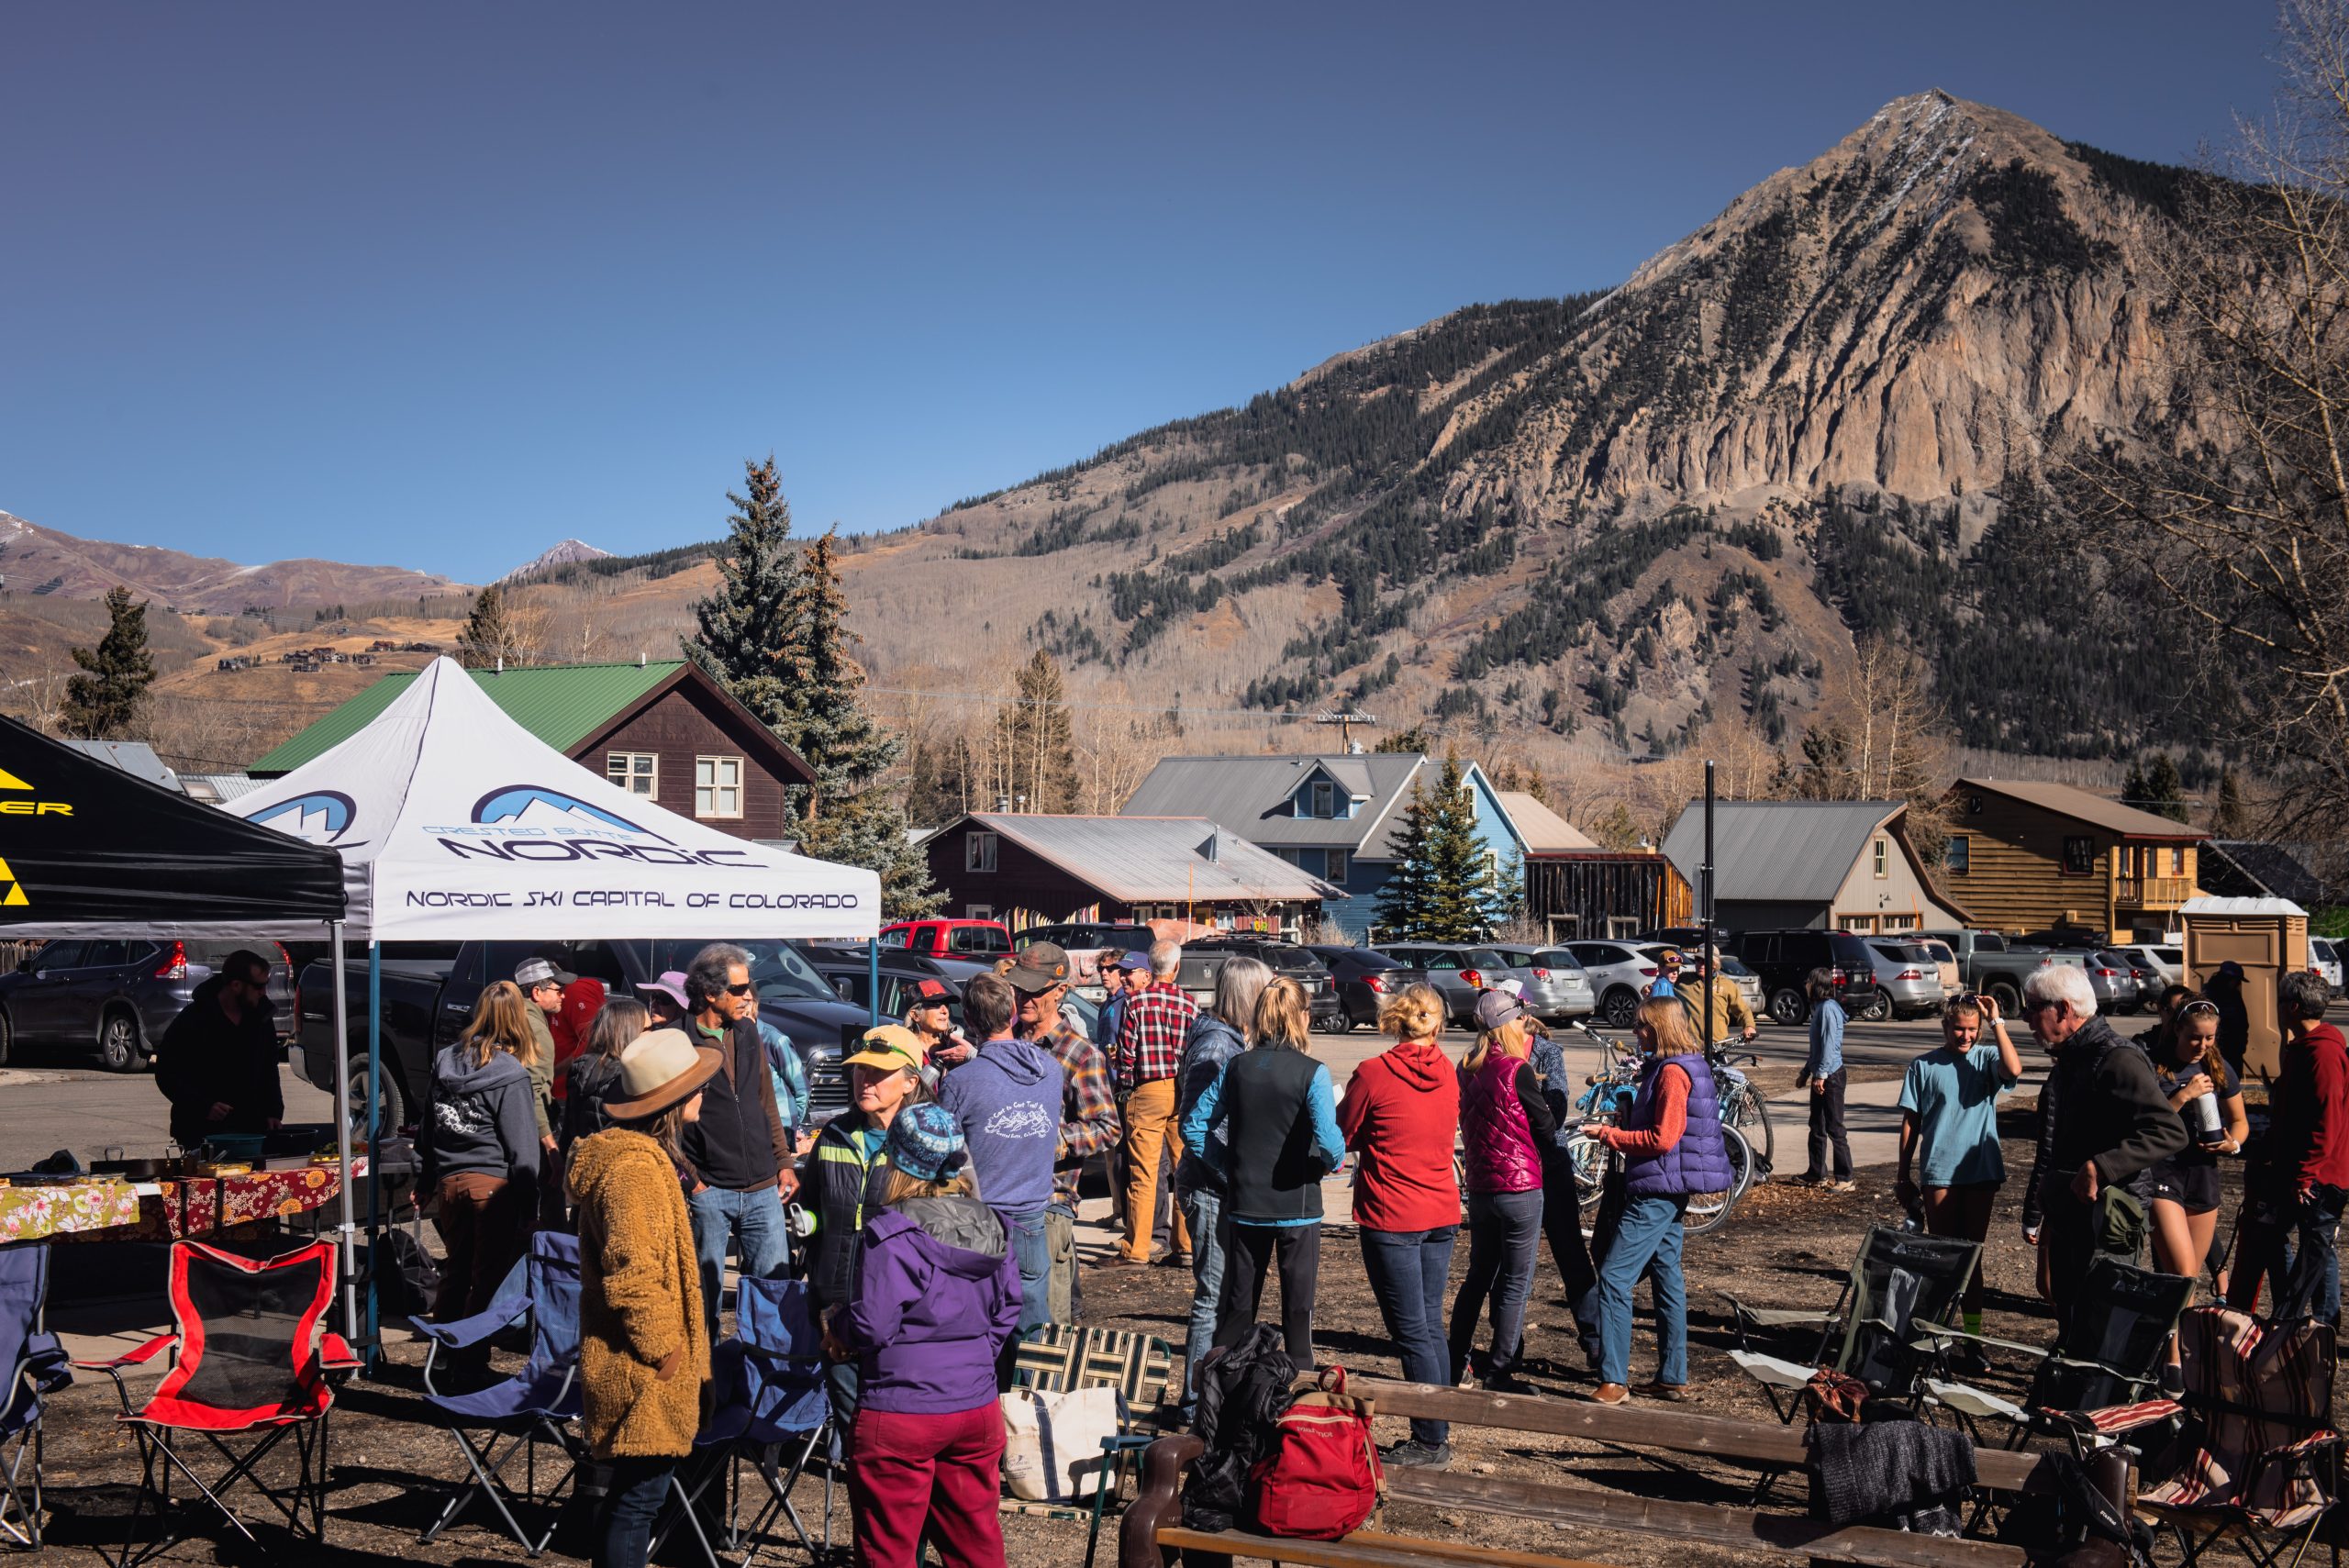 The CB Nordic community gathers outside the Nordic Center for the Annual Potluck with Mt. Crested Butte in the background.